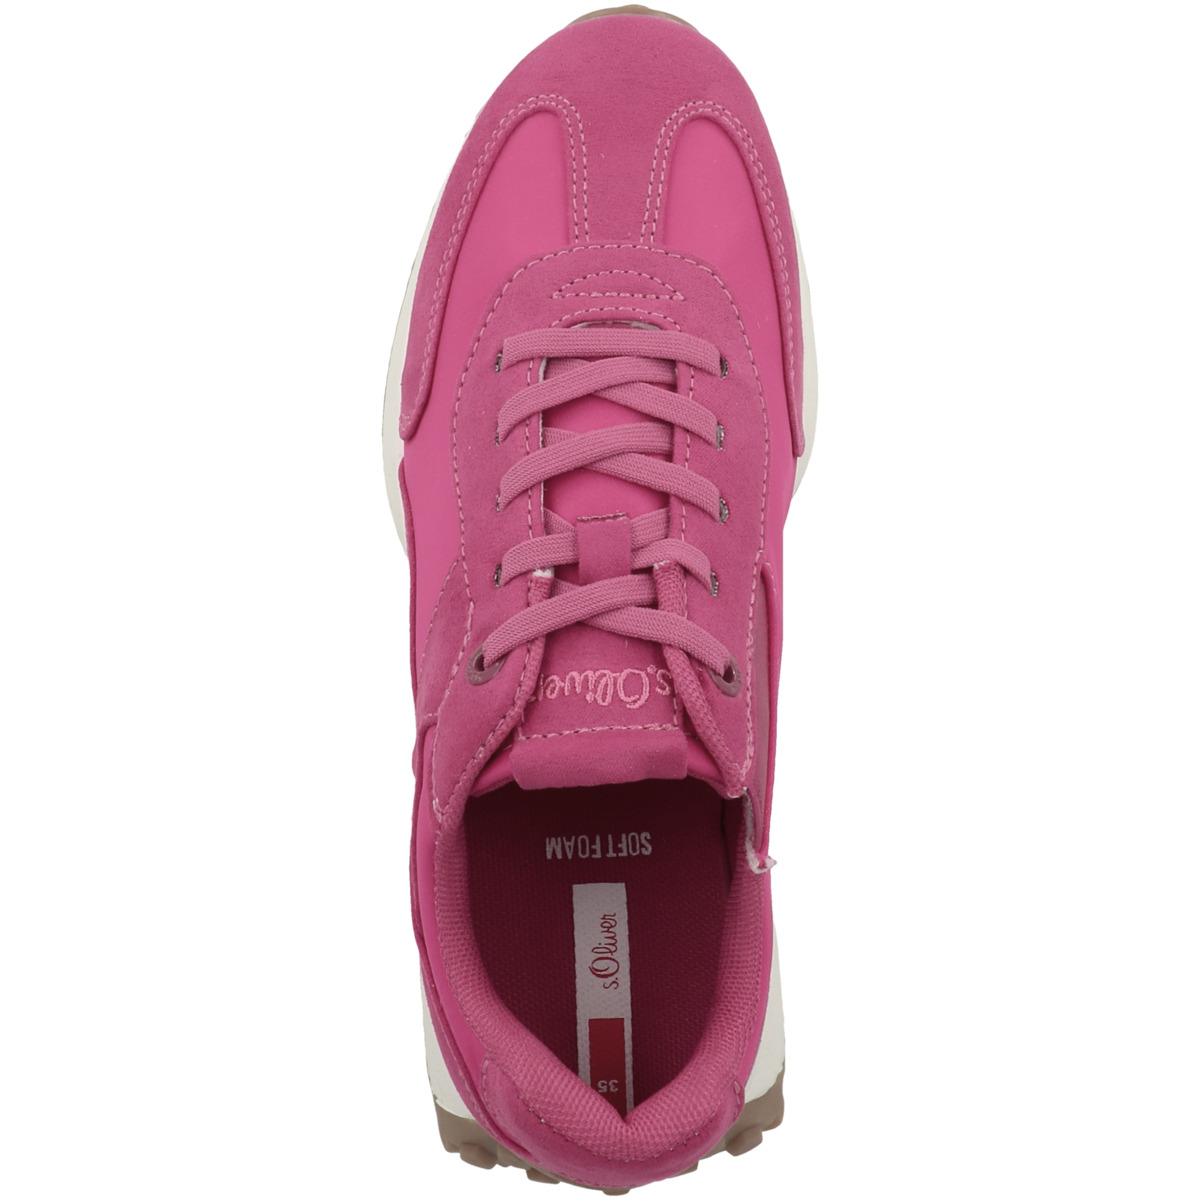 s.Oliver 5-43208-30 Sneaker low pink